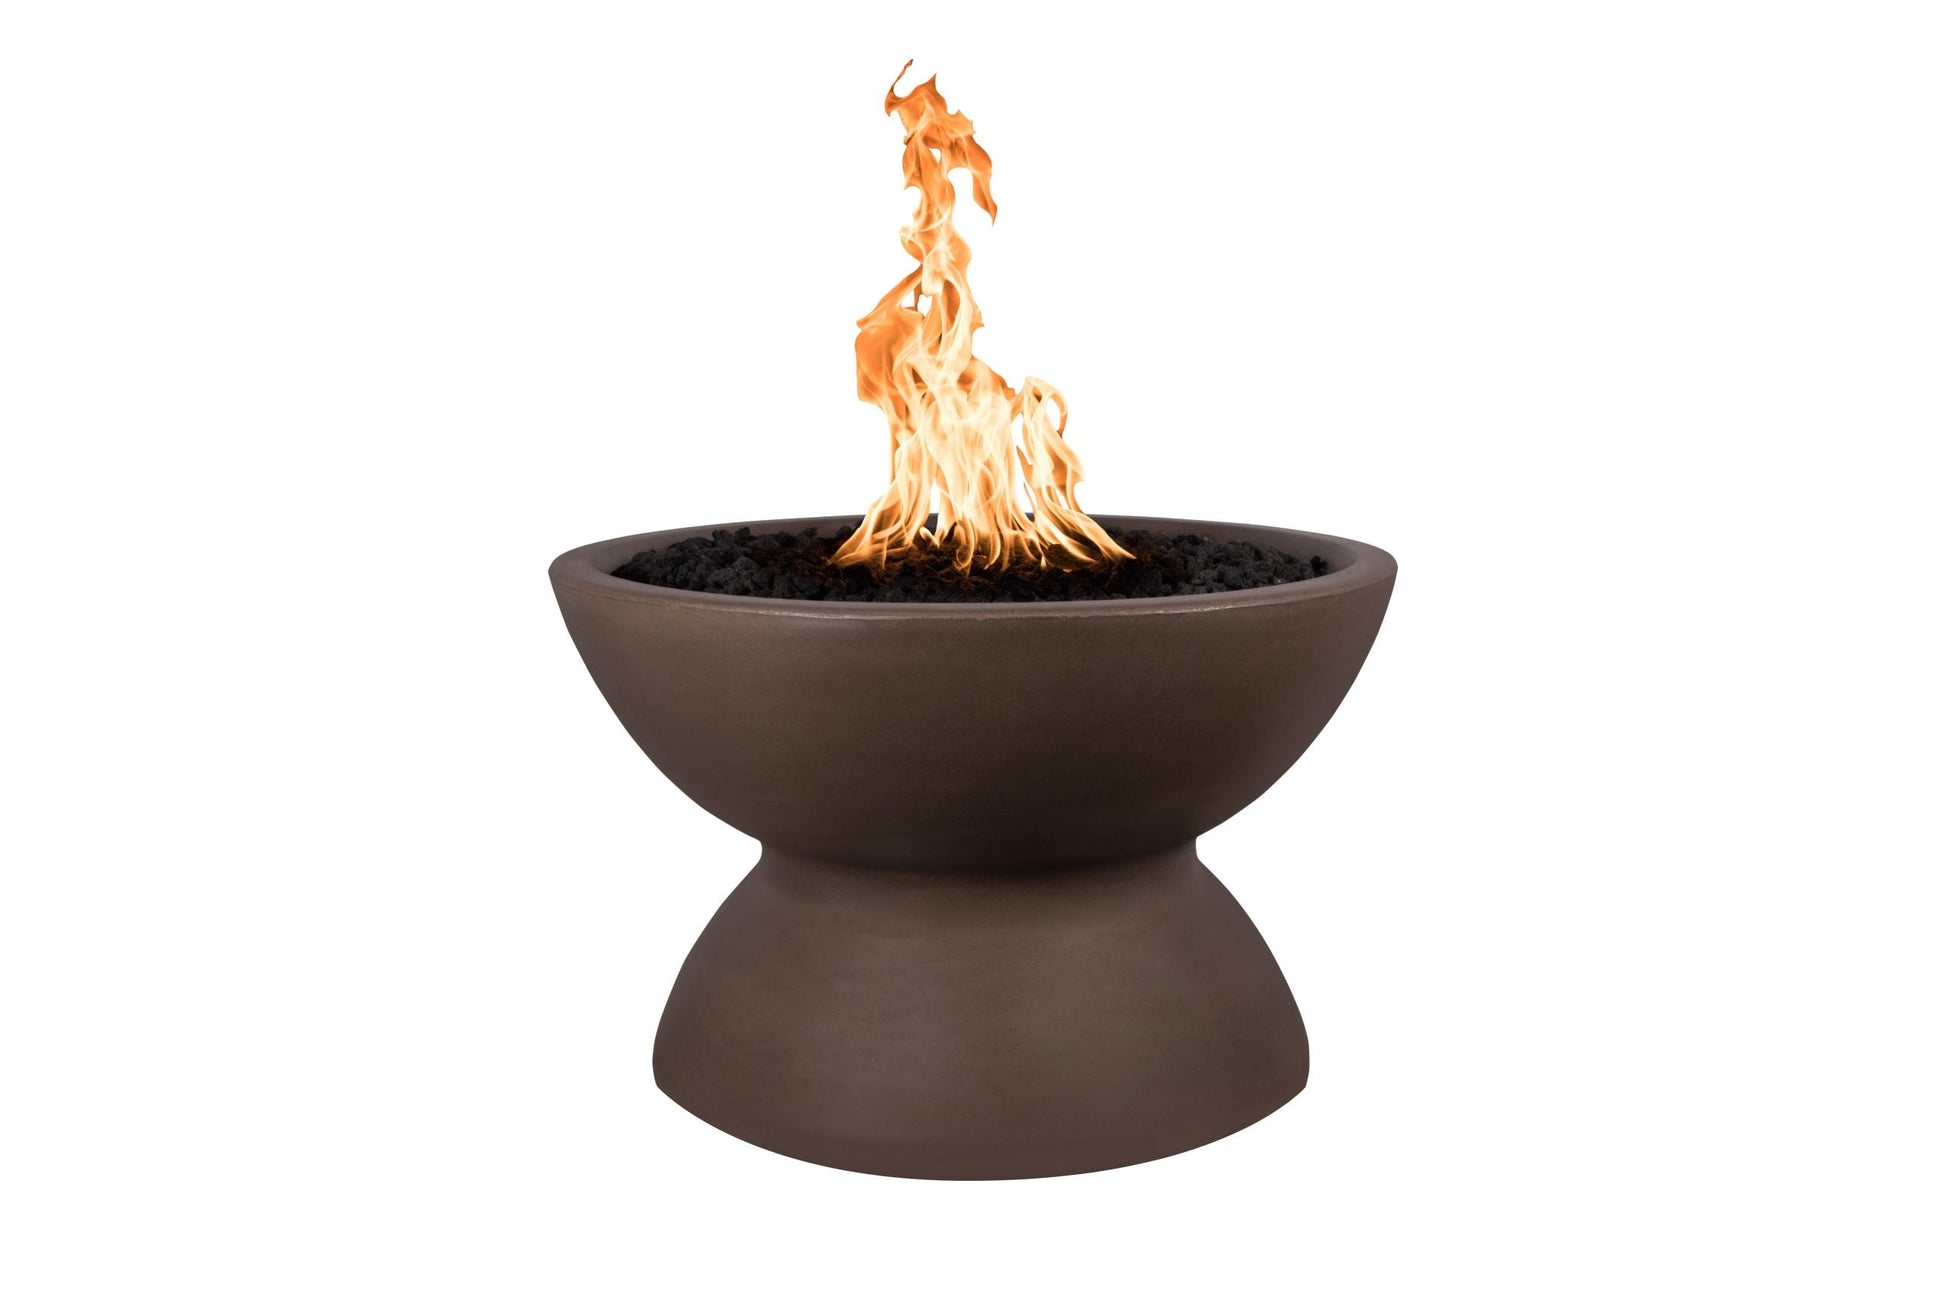 The Outdoor Plus Round Copa 33" Metallic Copper GFRC Concrete Natural Gas Fire Pit with 110V Electronic Ignition